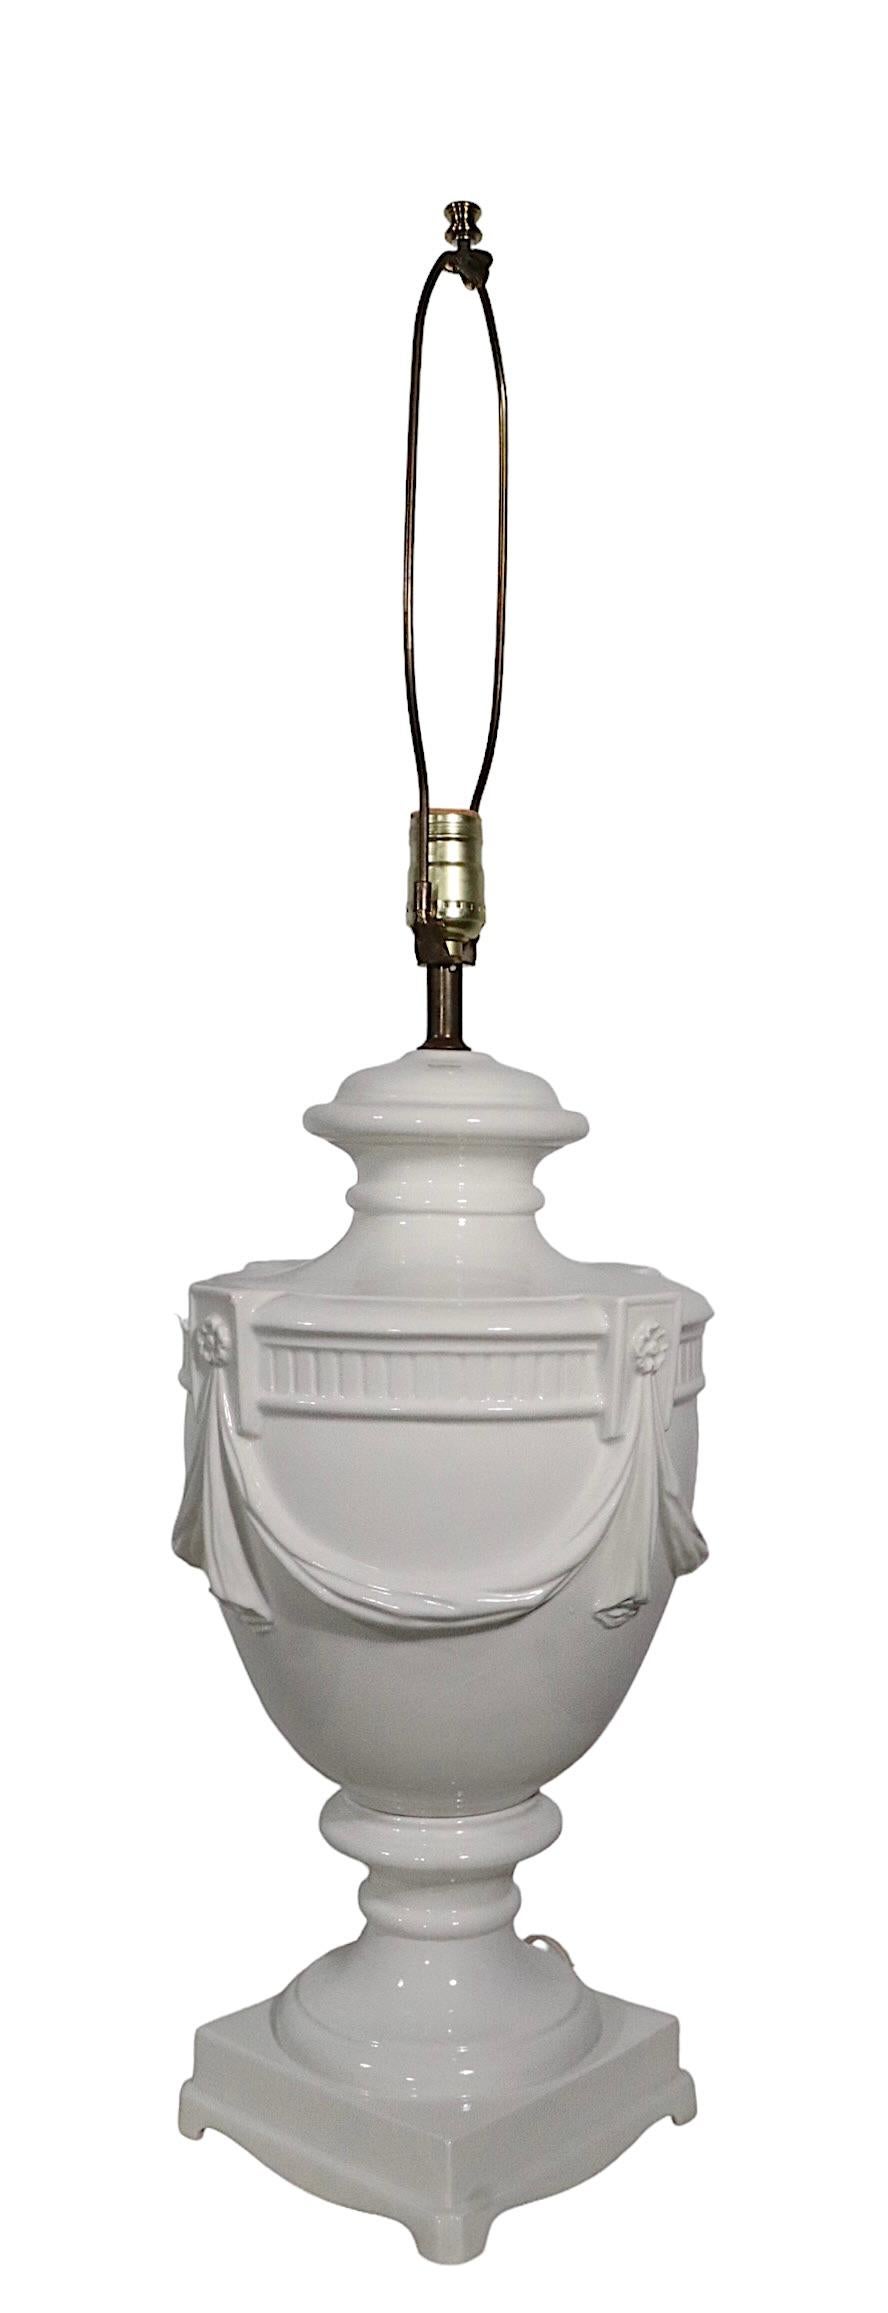 20th Century White on White Ceramic Urn Form Table Lamp Made in Italy, circa, 1950s-1970s For Sale